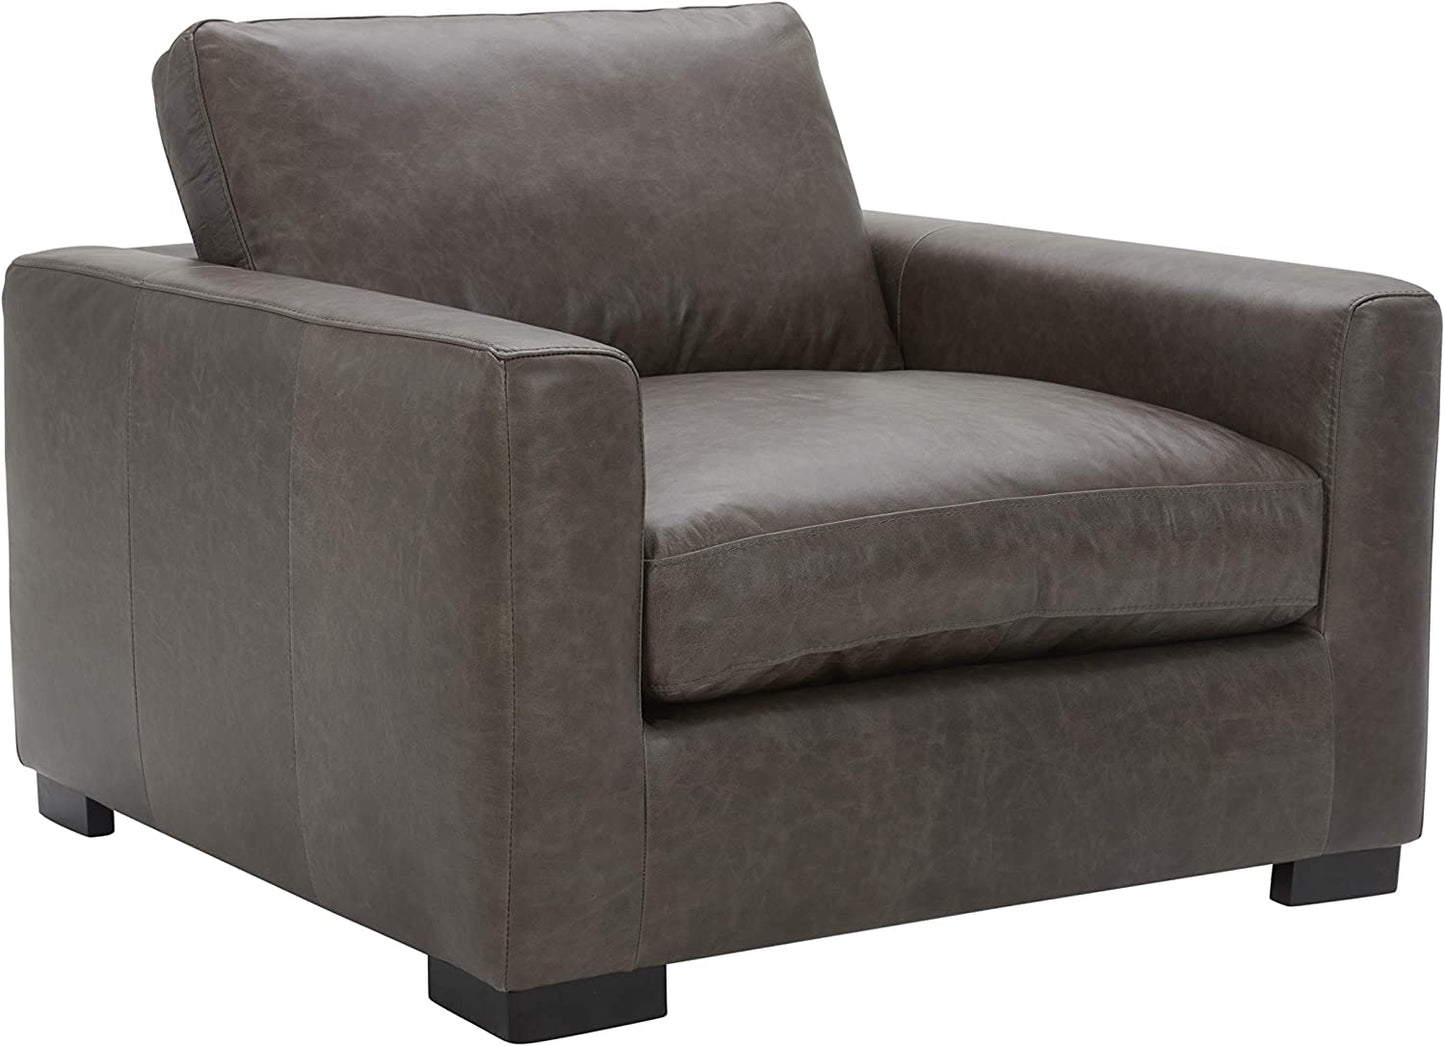 Amazon Brand - Stone & Beam Westview Extra-Deep Down-Filled Leather Accent Chair 43.3"W Dark Grey